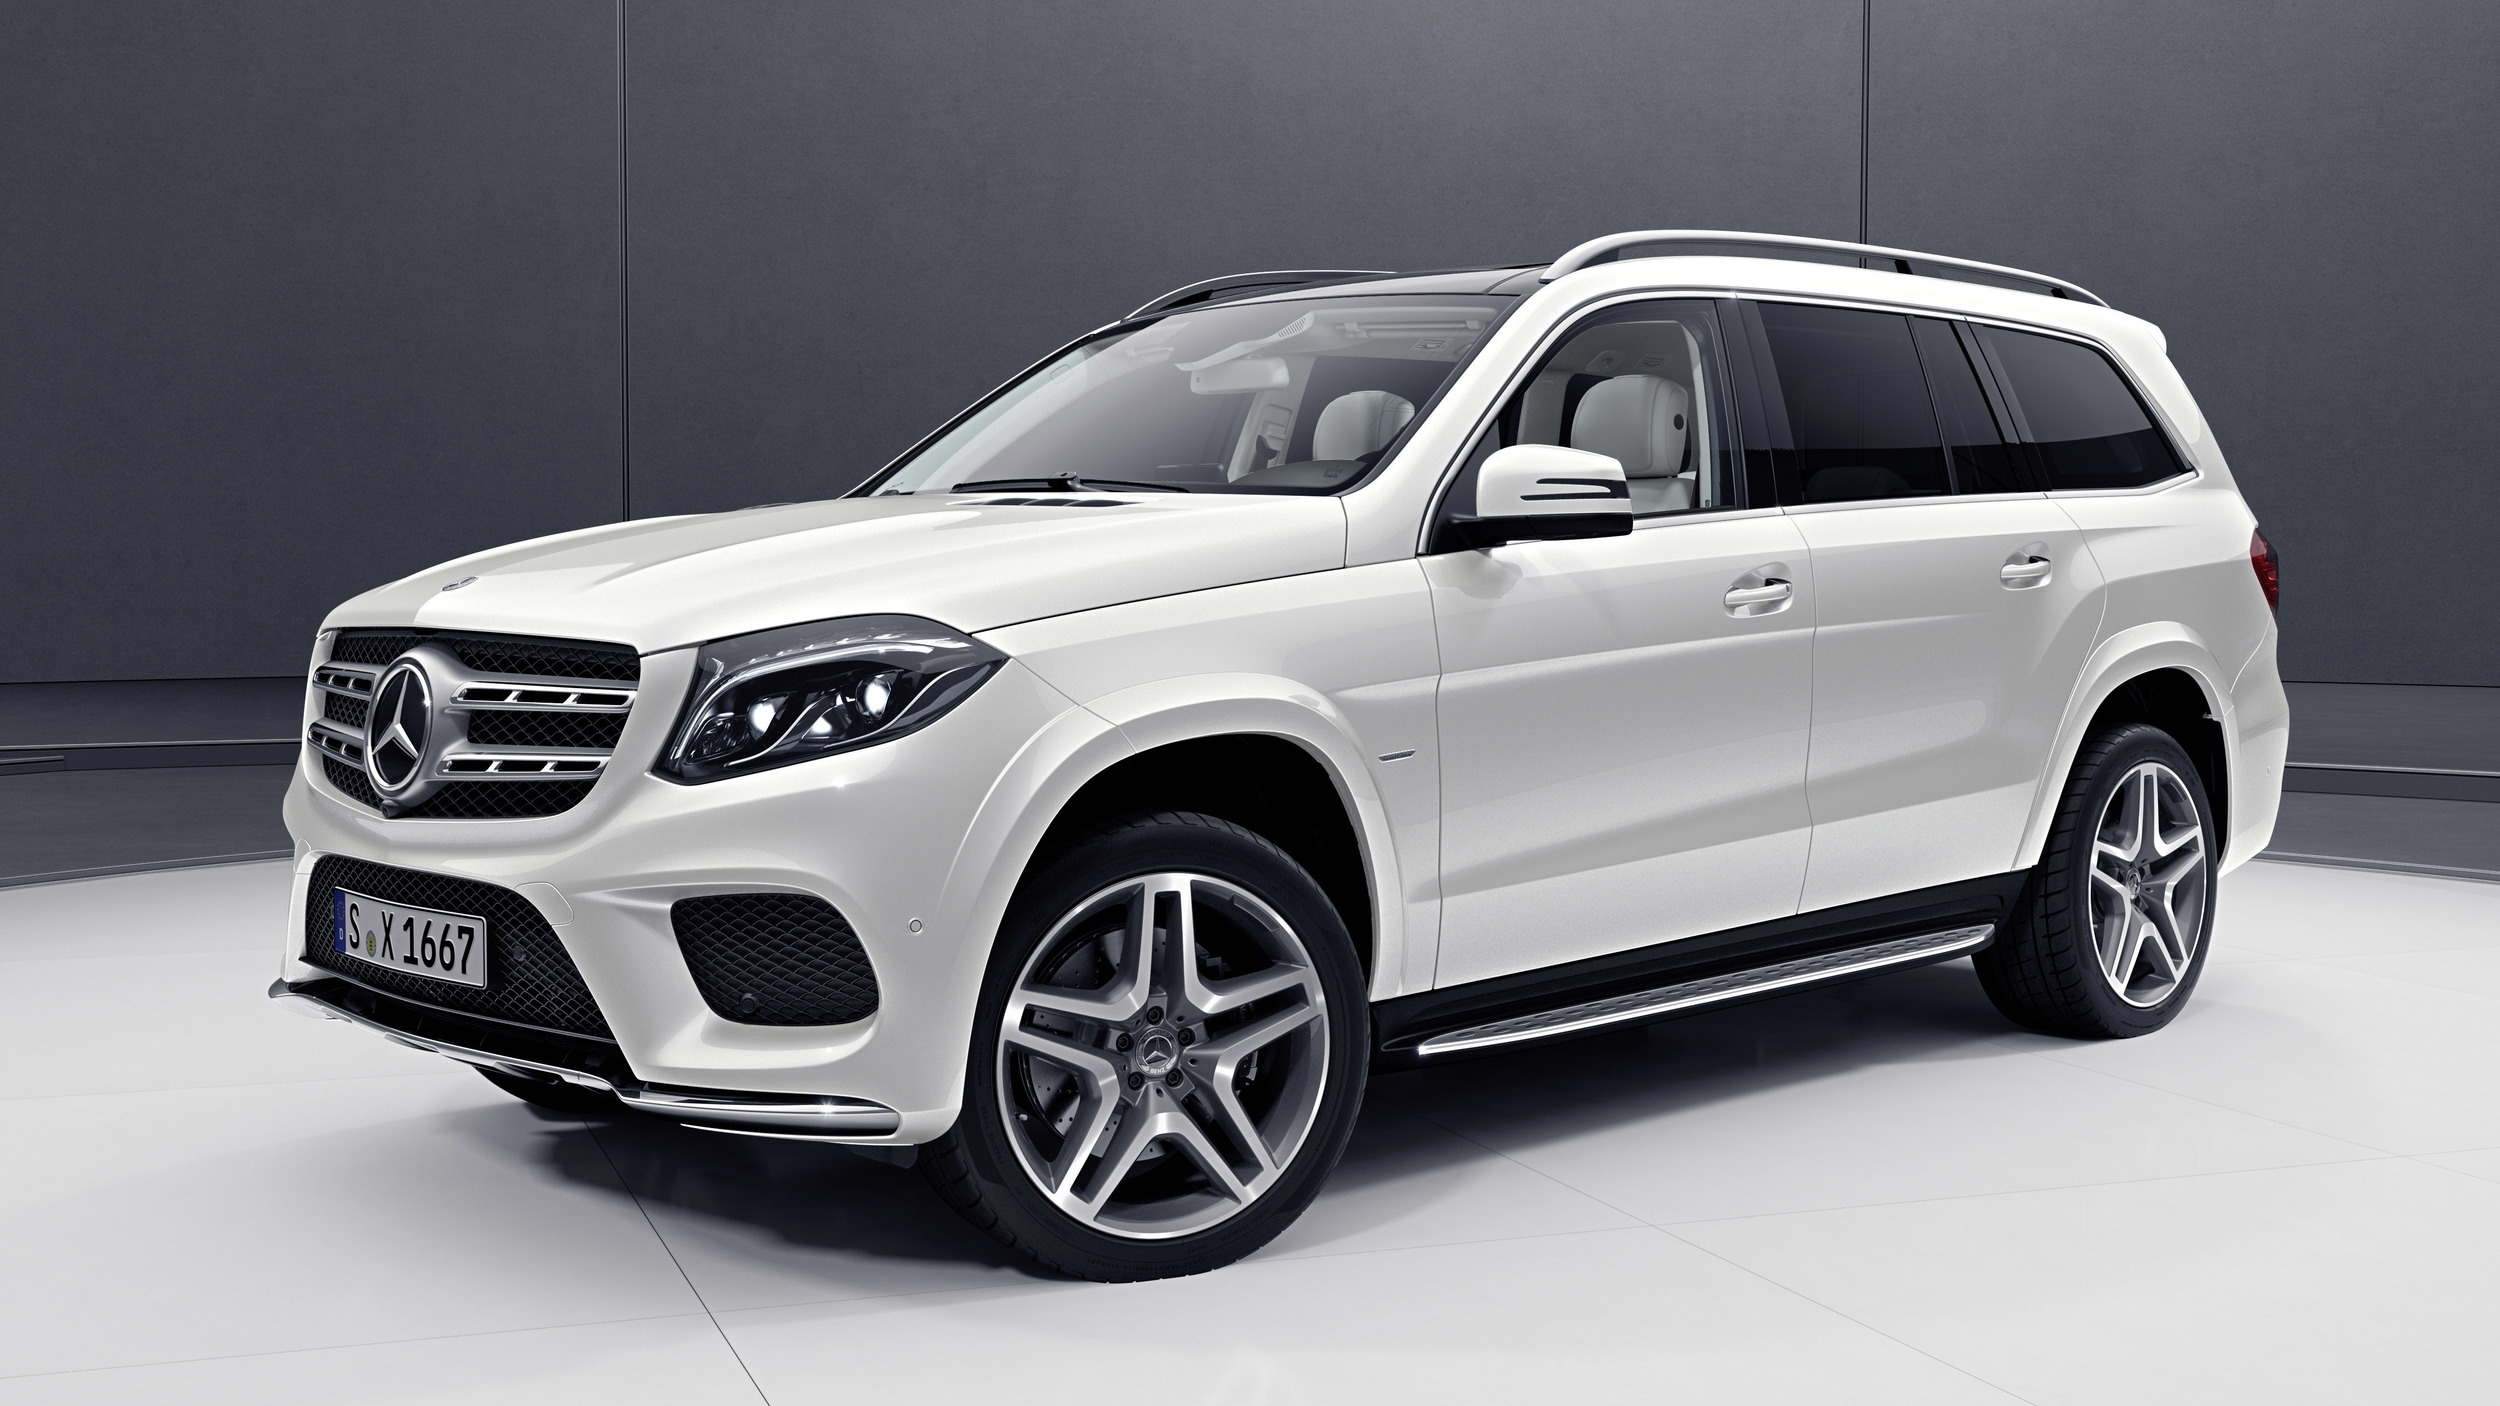 2018 Mercedes-Benz GLS 450 and GLS 550 Grand Edition Photo Gallery